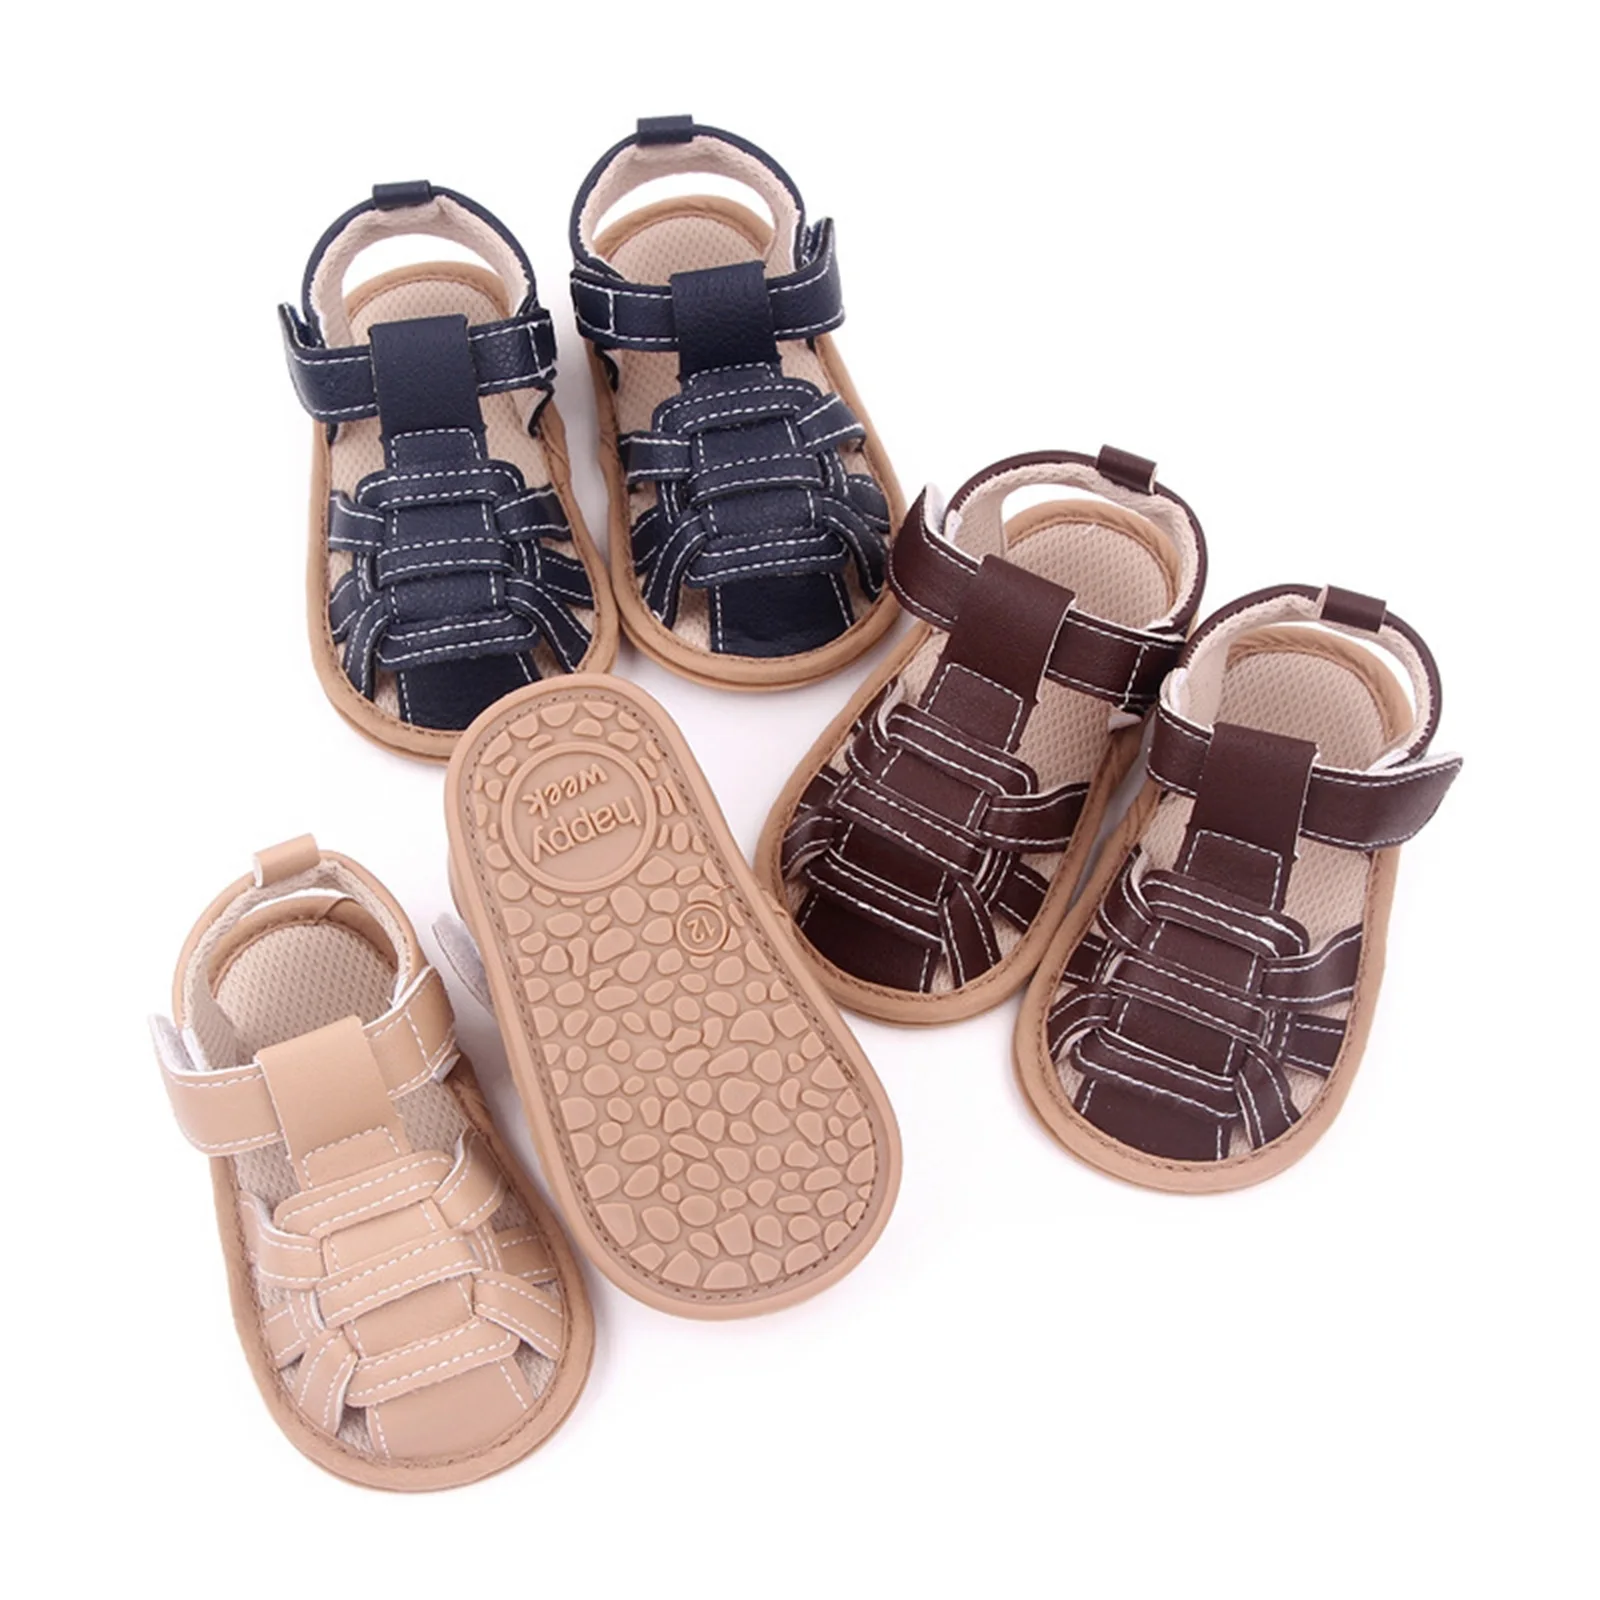 

Newborn Baby Boy Closed Toe Sandals Breathable Soft Sole Non-slip Summer Beach Walking Shoes Toddler Infant First Walkers Shoes